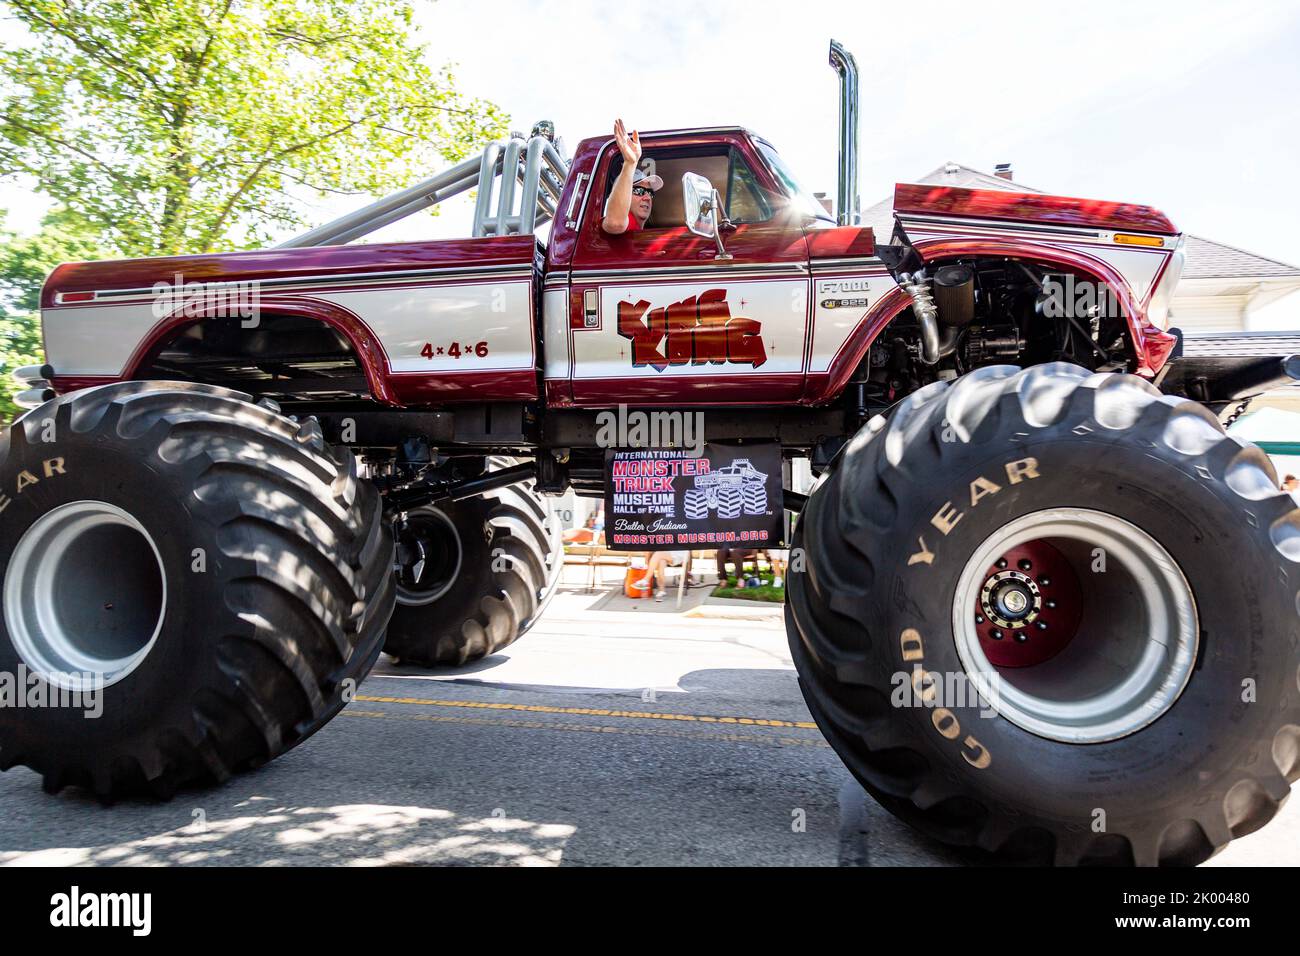 The 1975 Ford monster truck 'King Kong' participates in the 2022 Auburn Cord Duesenberg Festival parade in Auburn, Indiana, USA. Stock Photo